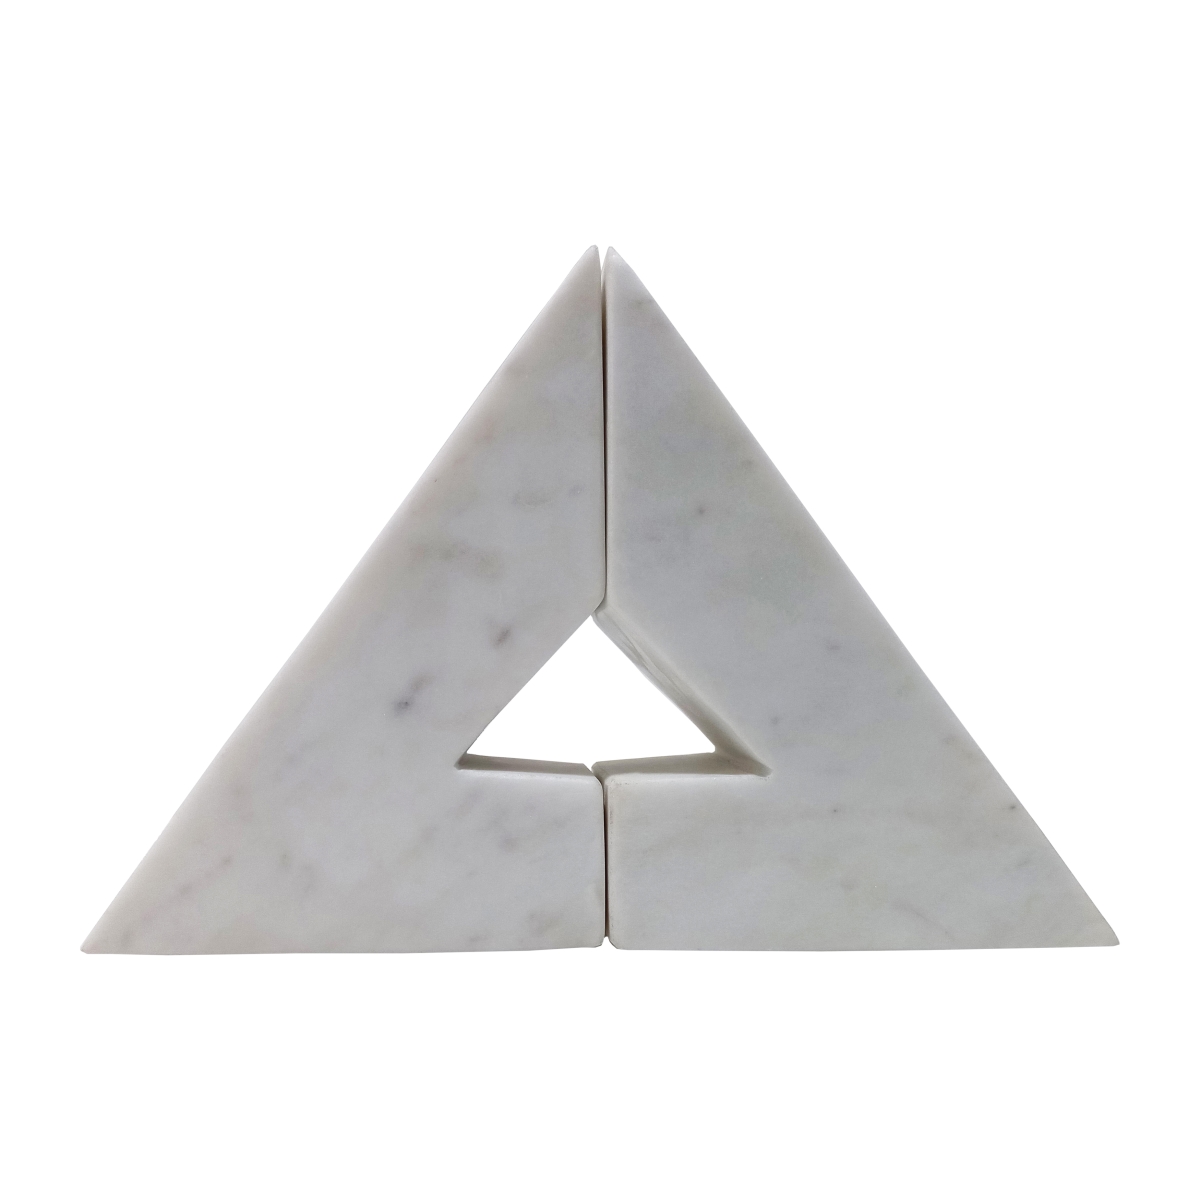 Picture of Sagebrook Home 17472 6 in. Marble Right Triangle Bookends, White - Set of 2